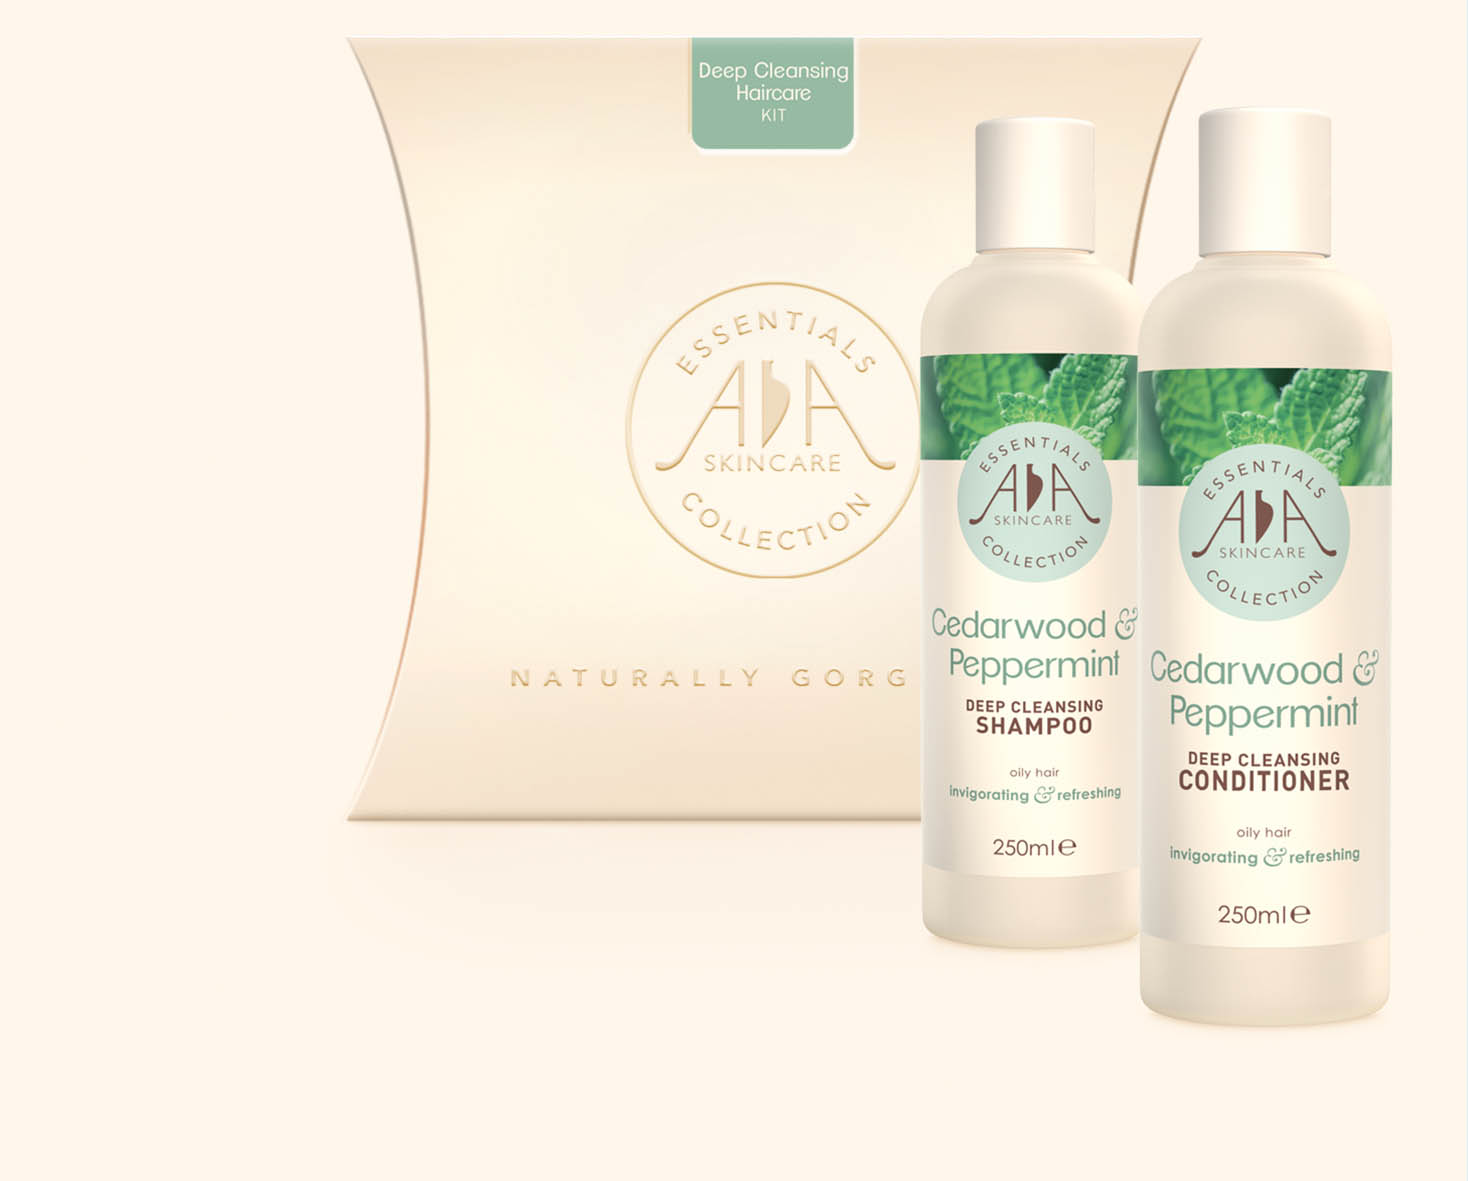 Deep Cleansing Haircare Kit AA Skincare